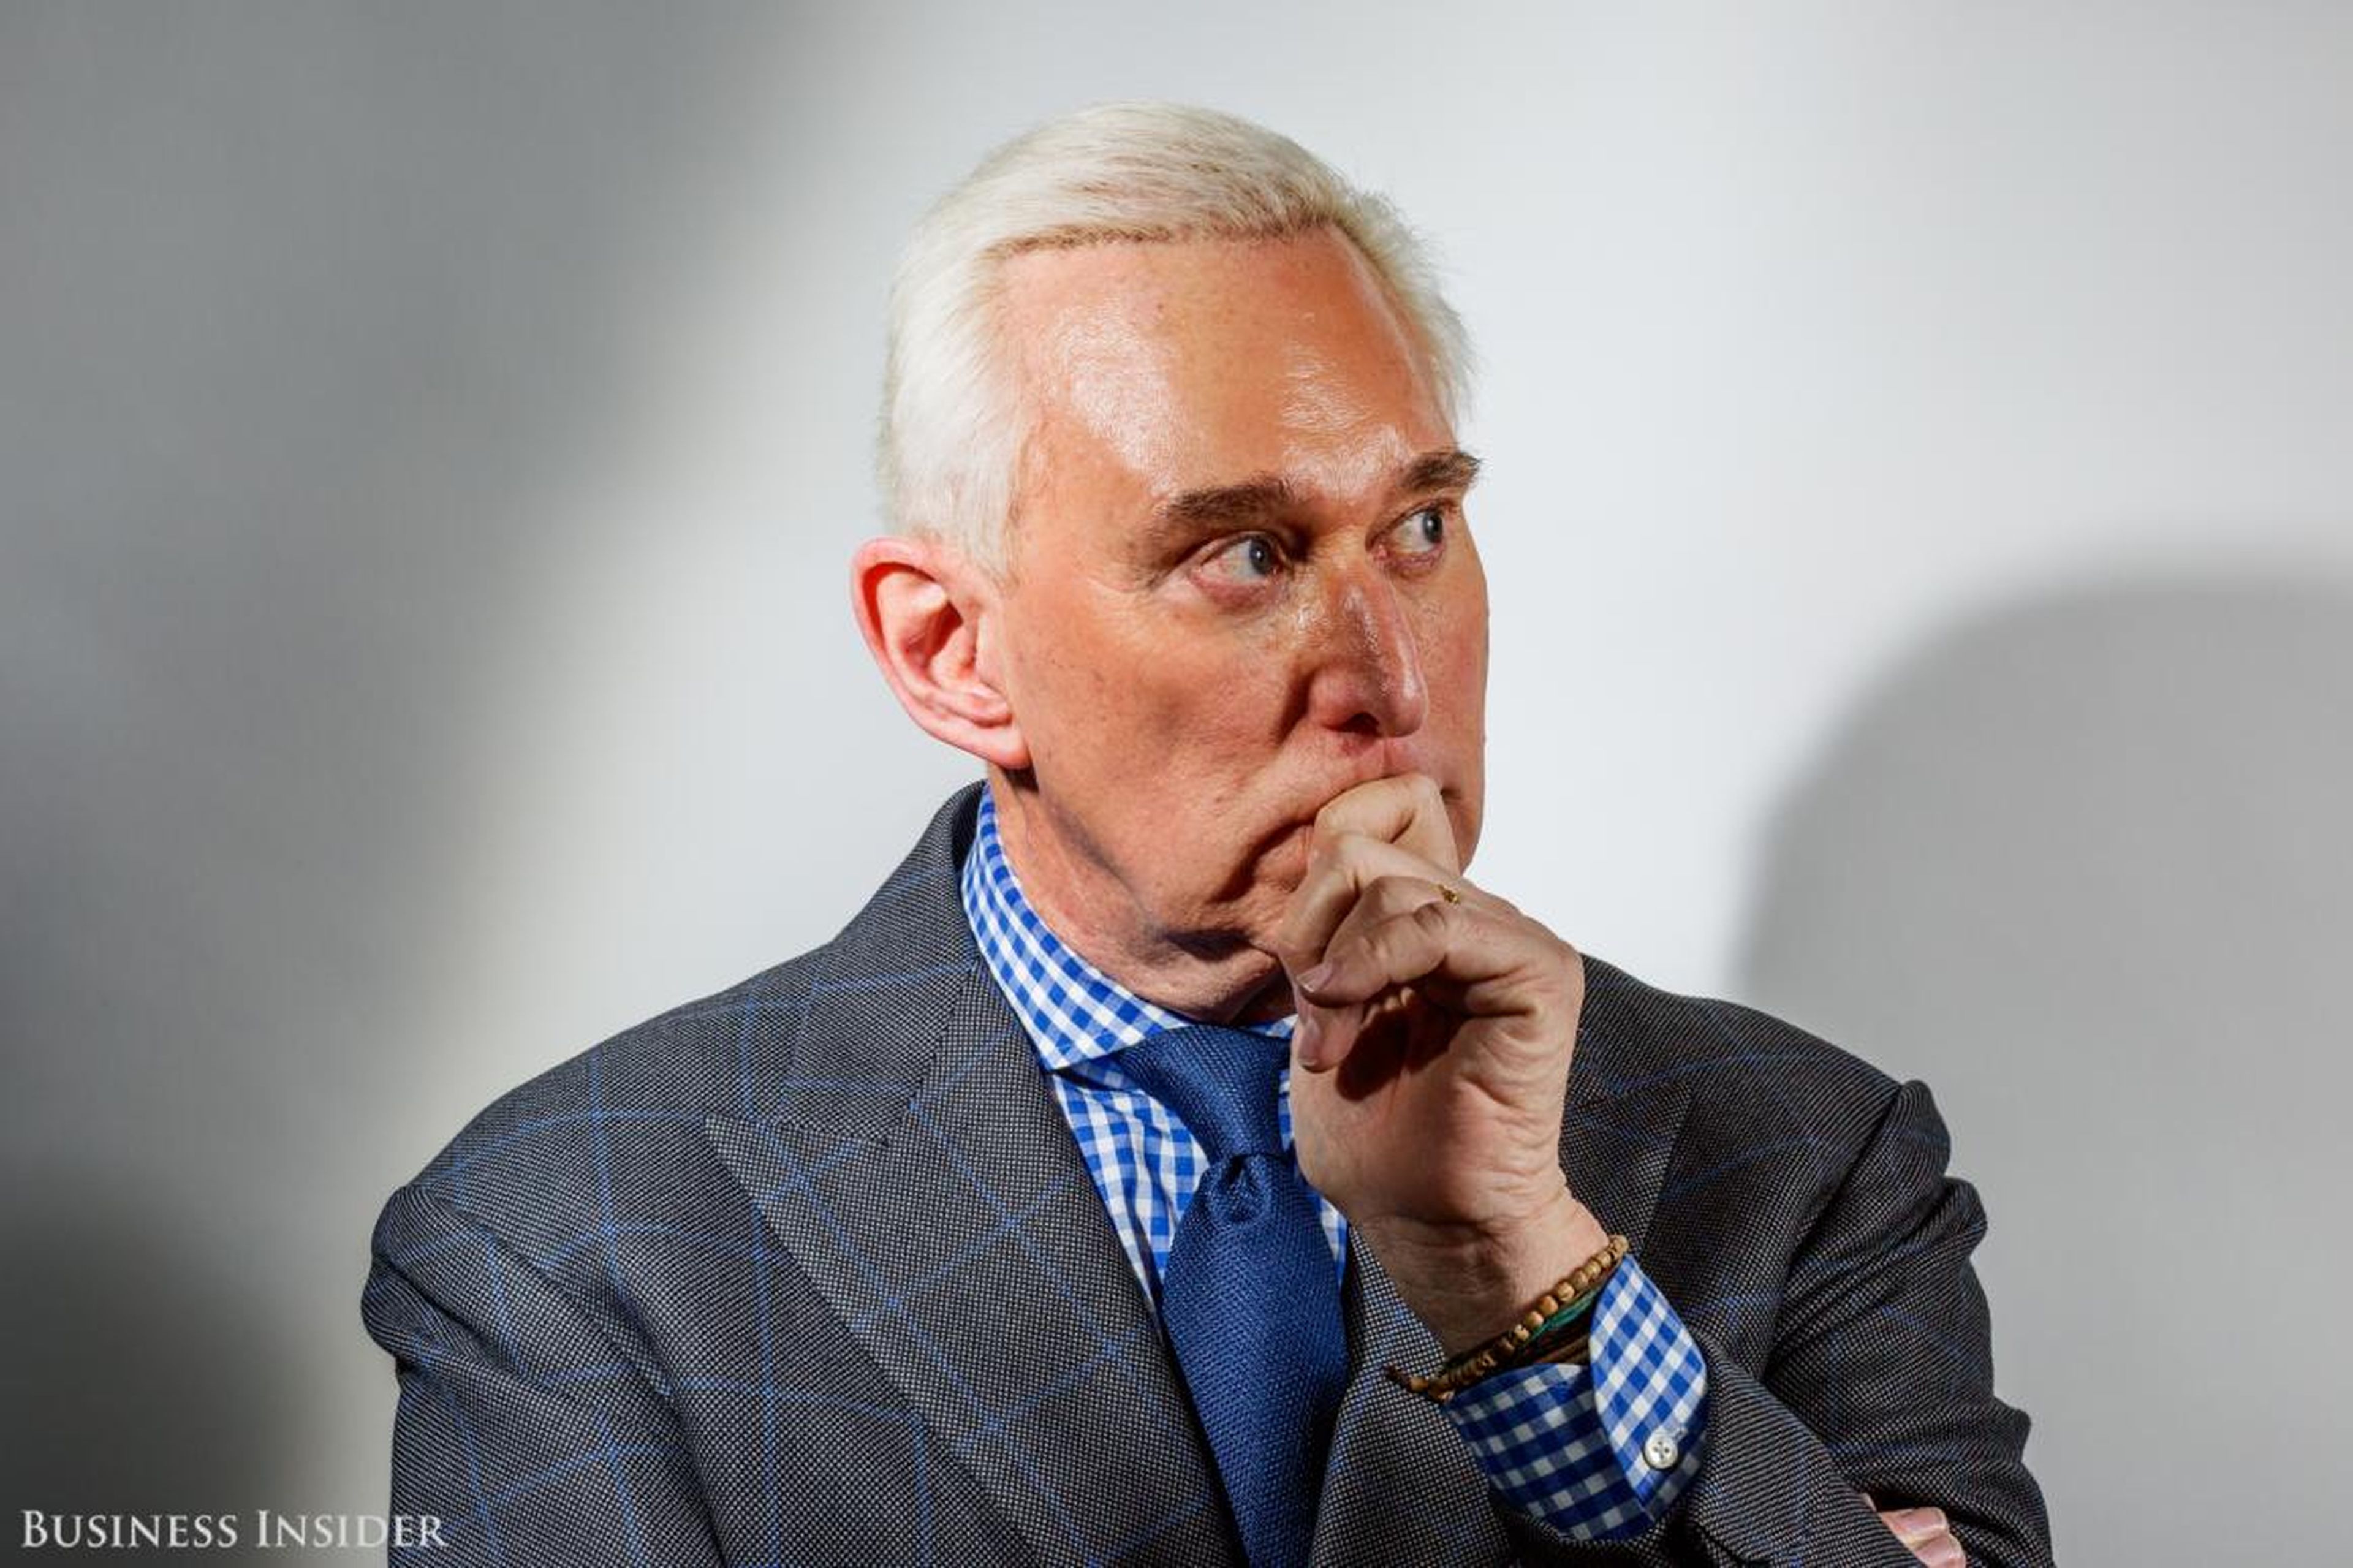 Roger Stone has said that Donald Trump was put on earth to be president.